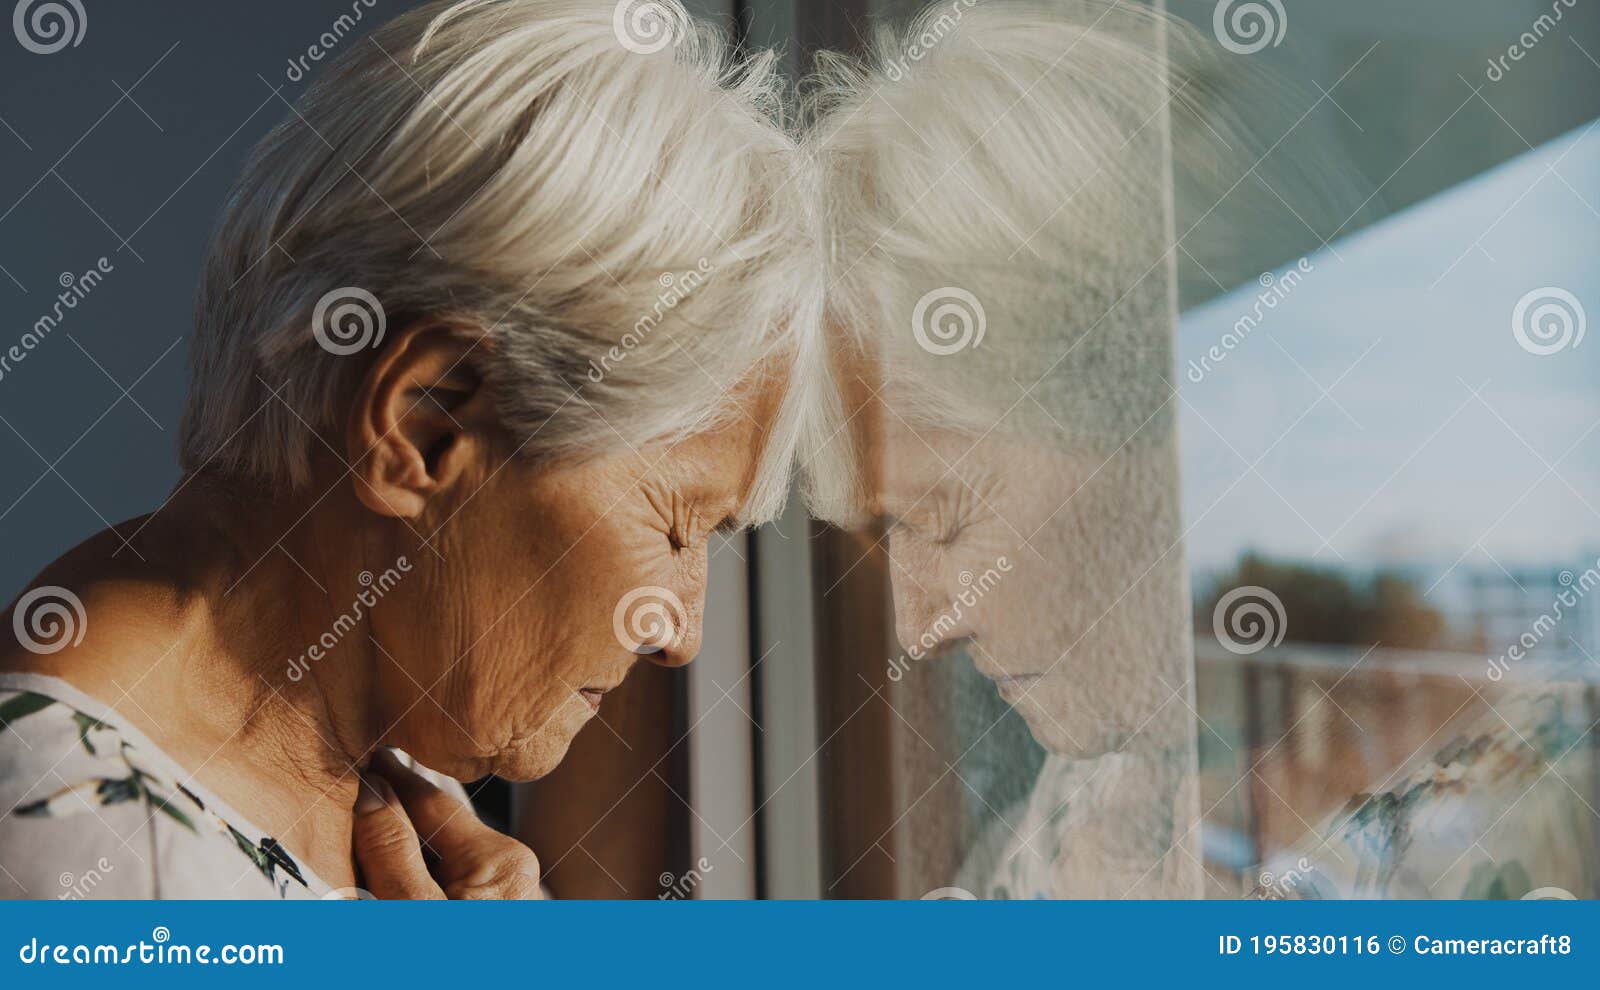 hopeless elderly woman, feeling loneliness during the lockdown. vulnerable group and mental health issues